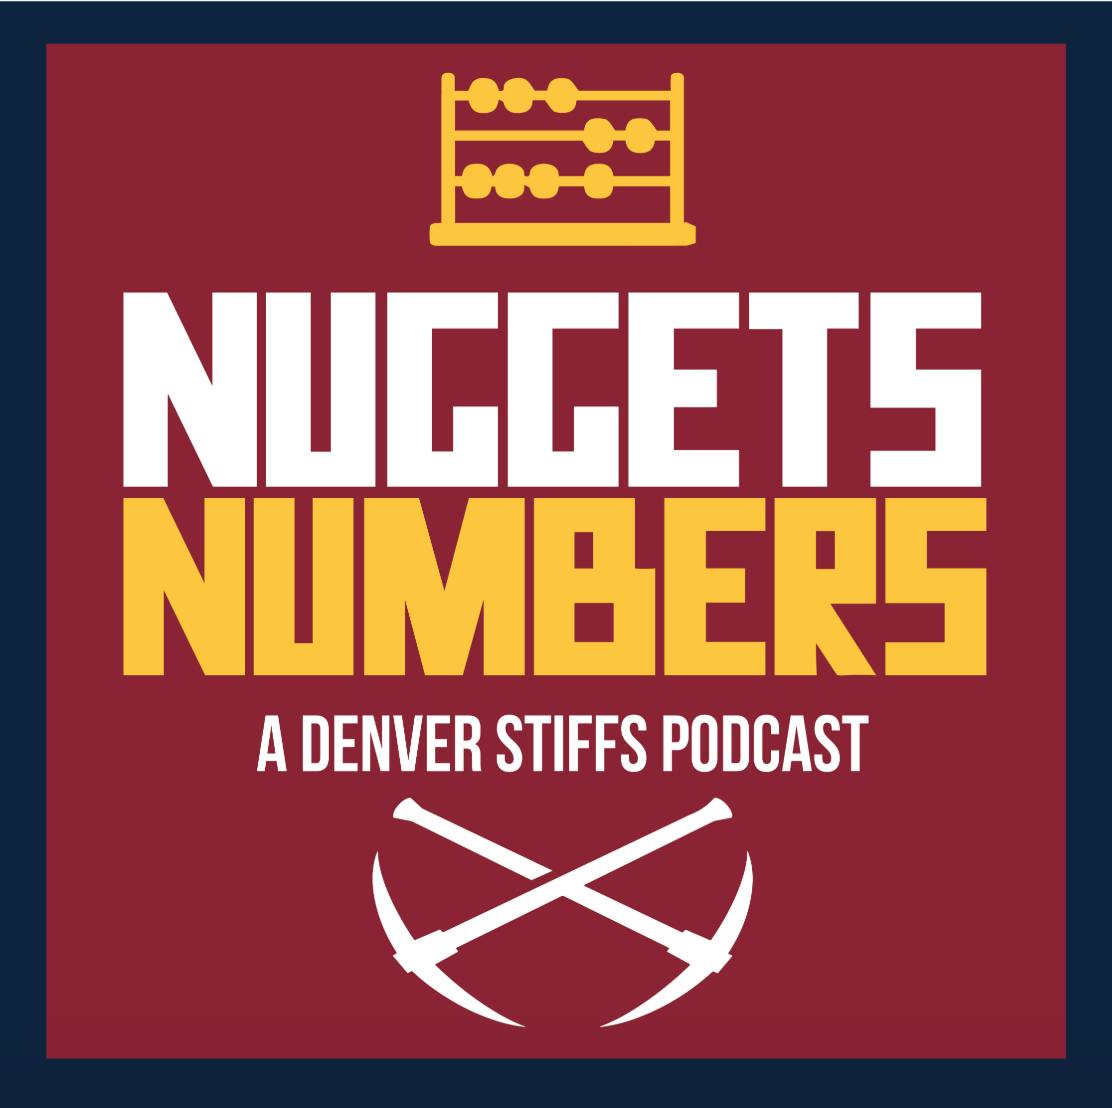 The Nuggets trounce the Rockets in their first win of the season | Nuggets Numbers